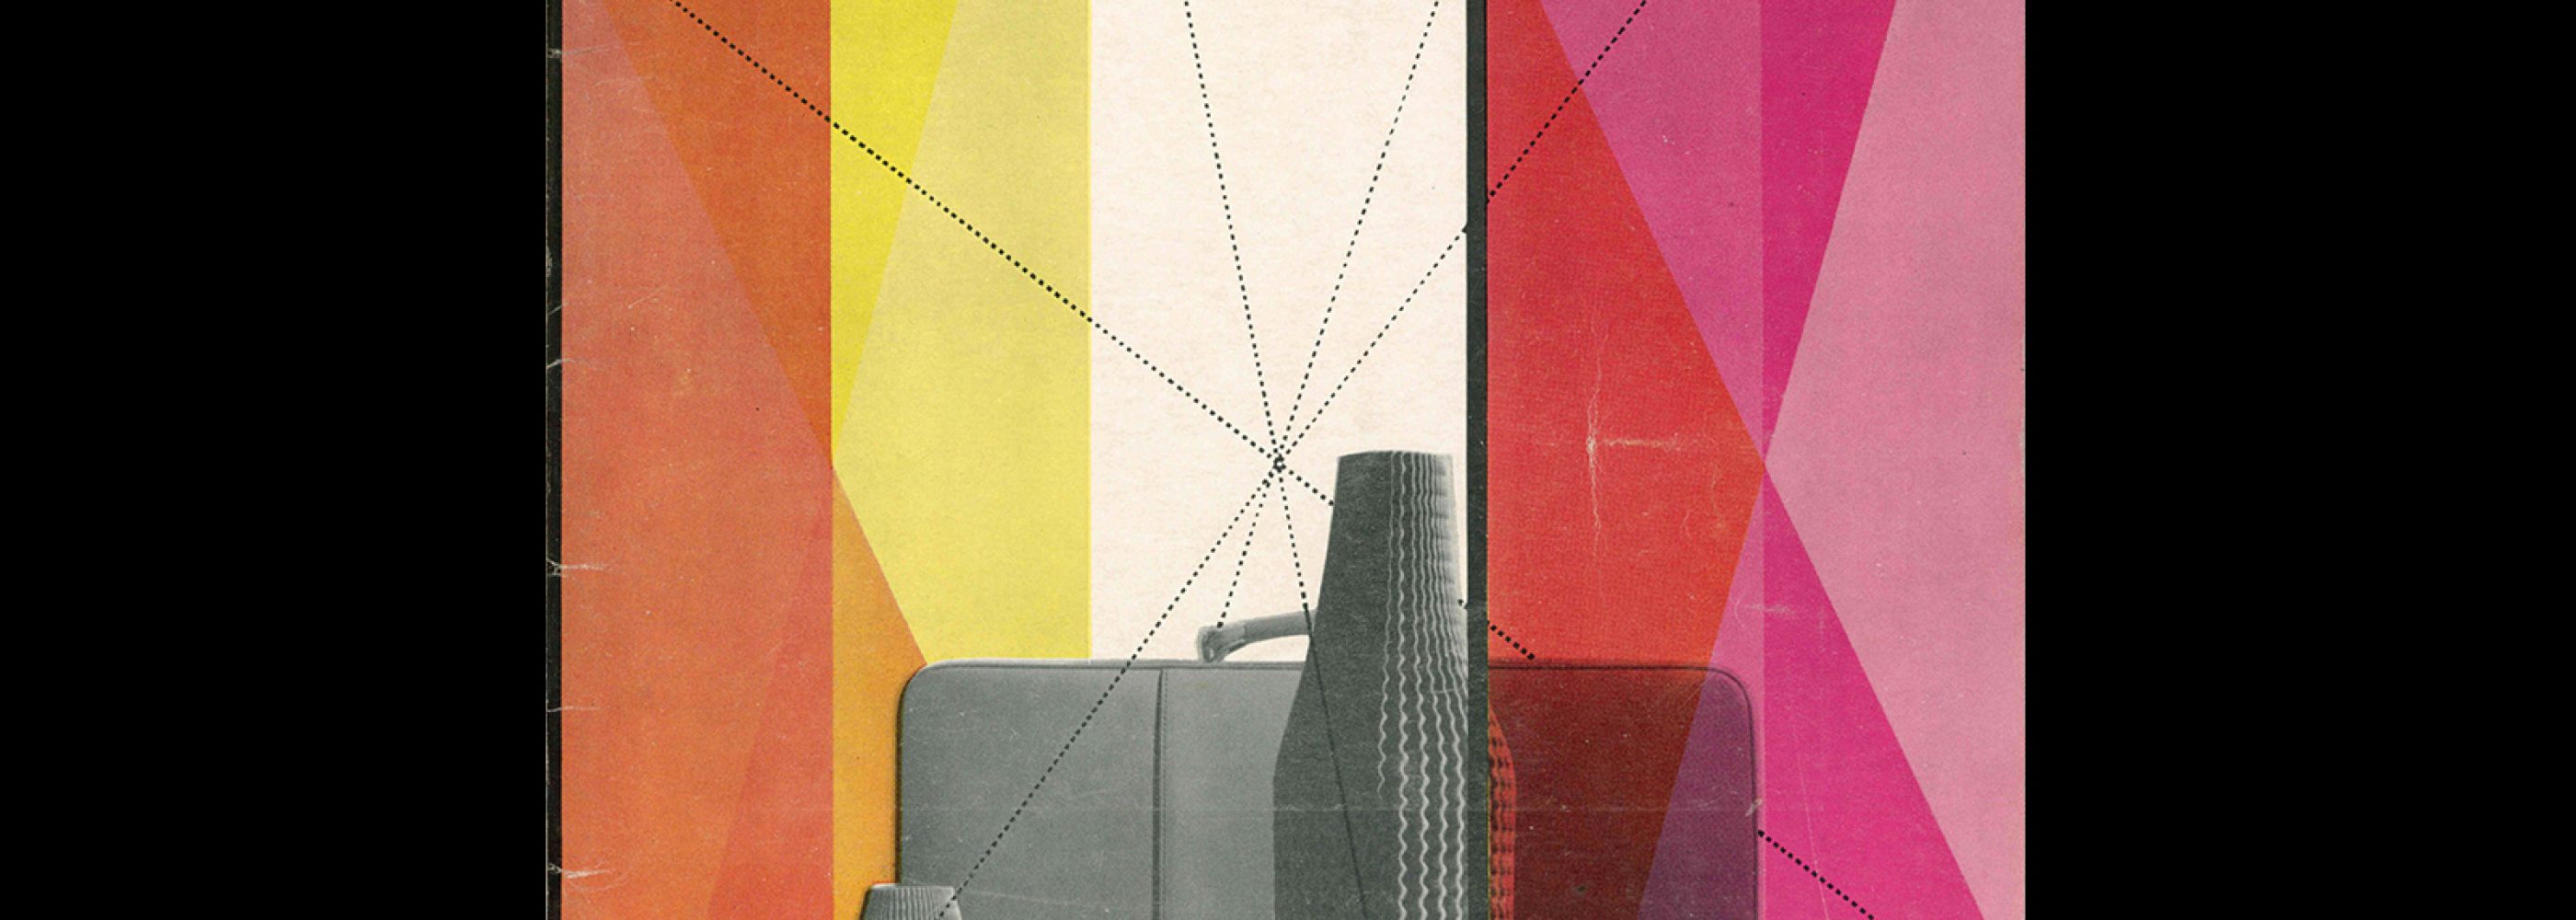 Design, Council of Industrial Design, 101, May 1957. Cover design by Tom Wolsey